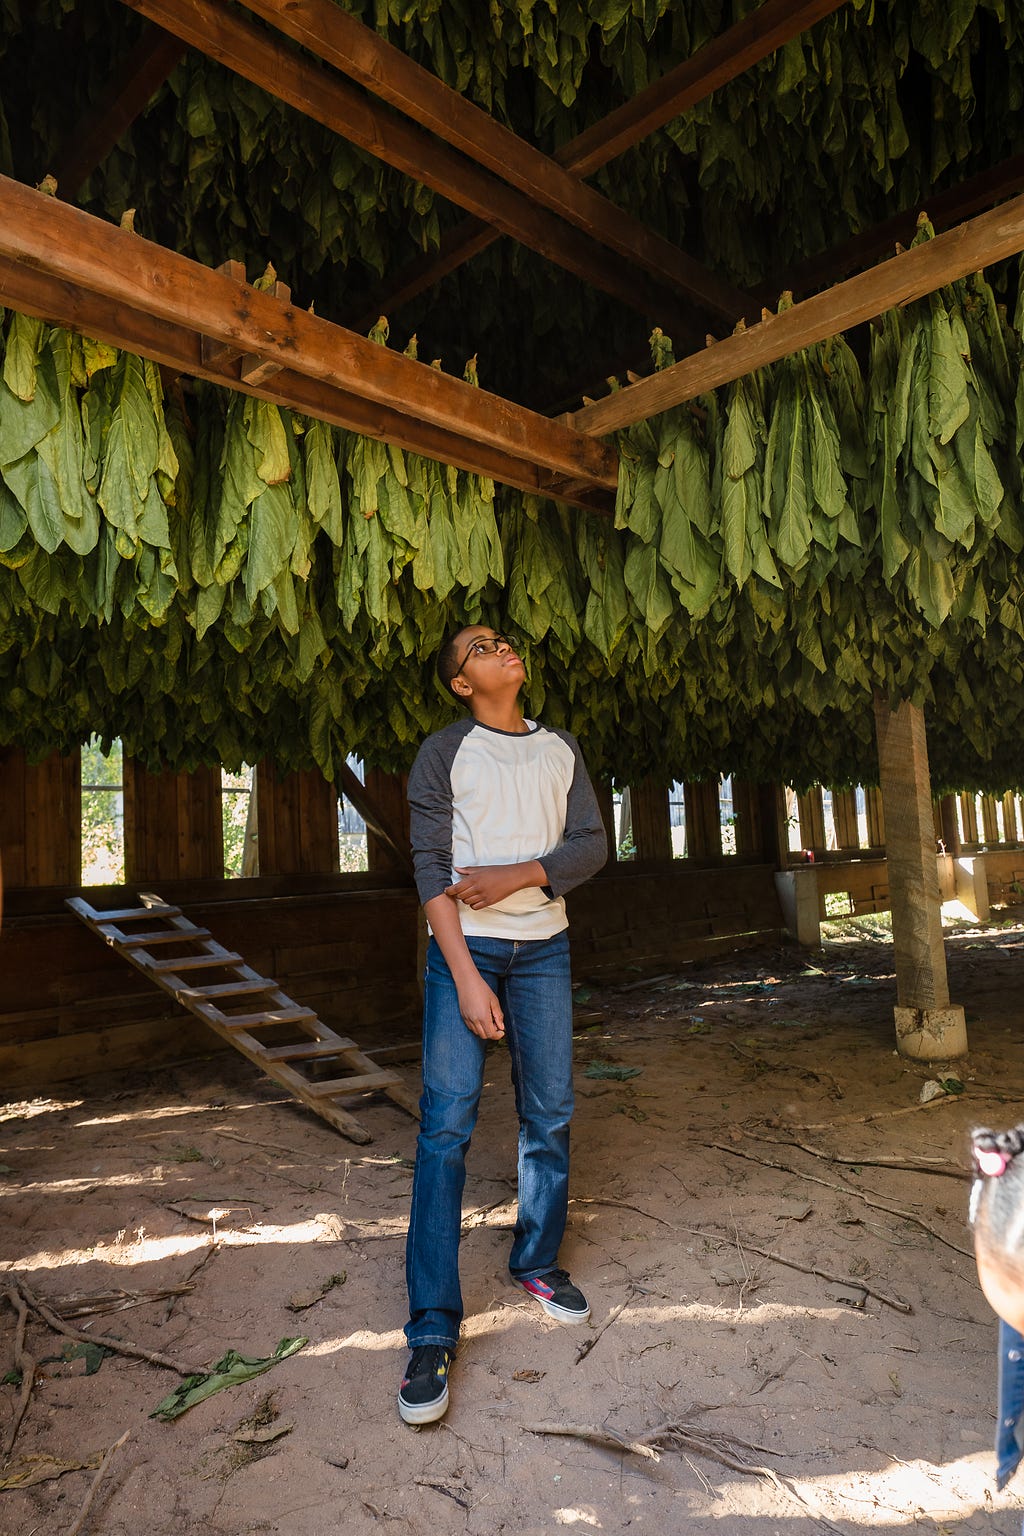 Young man stnads in tobacco barn. Tobacco leaves hang from above